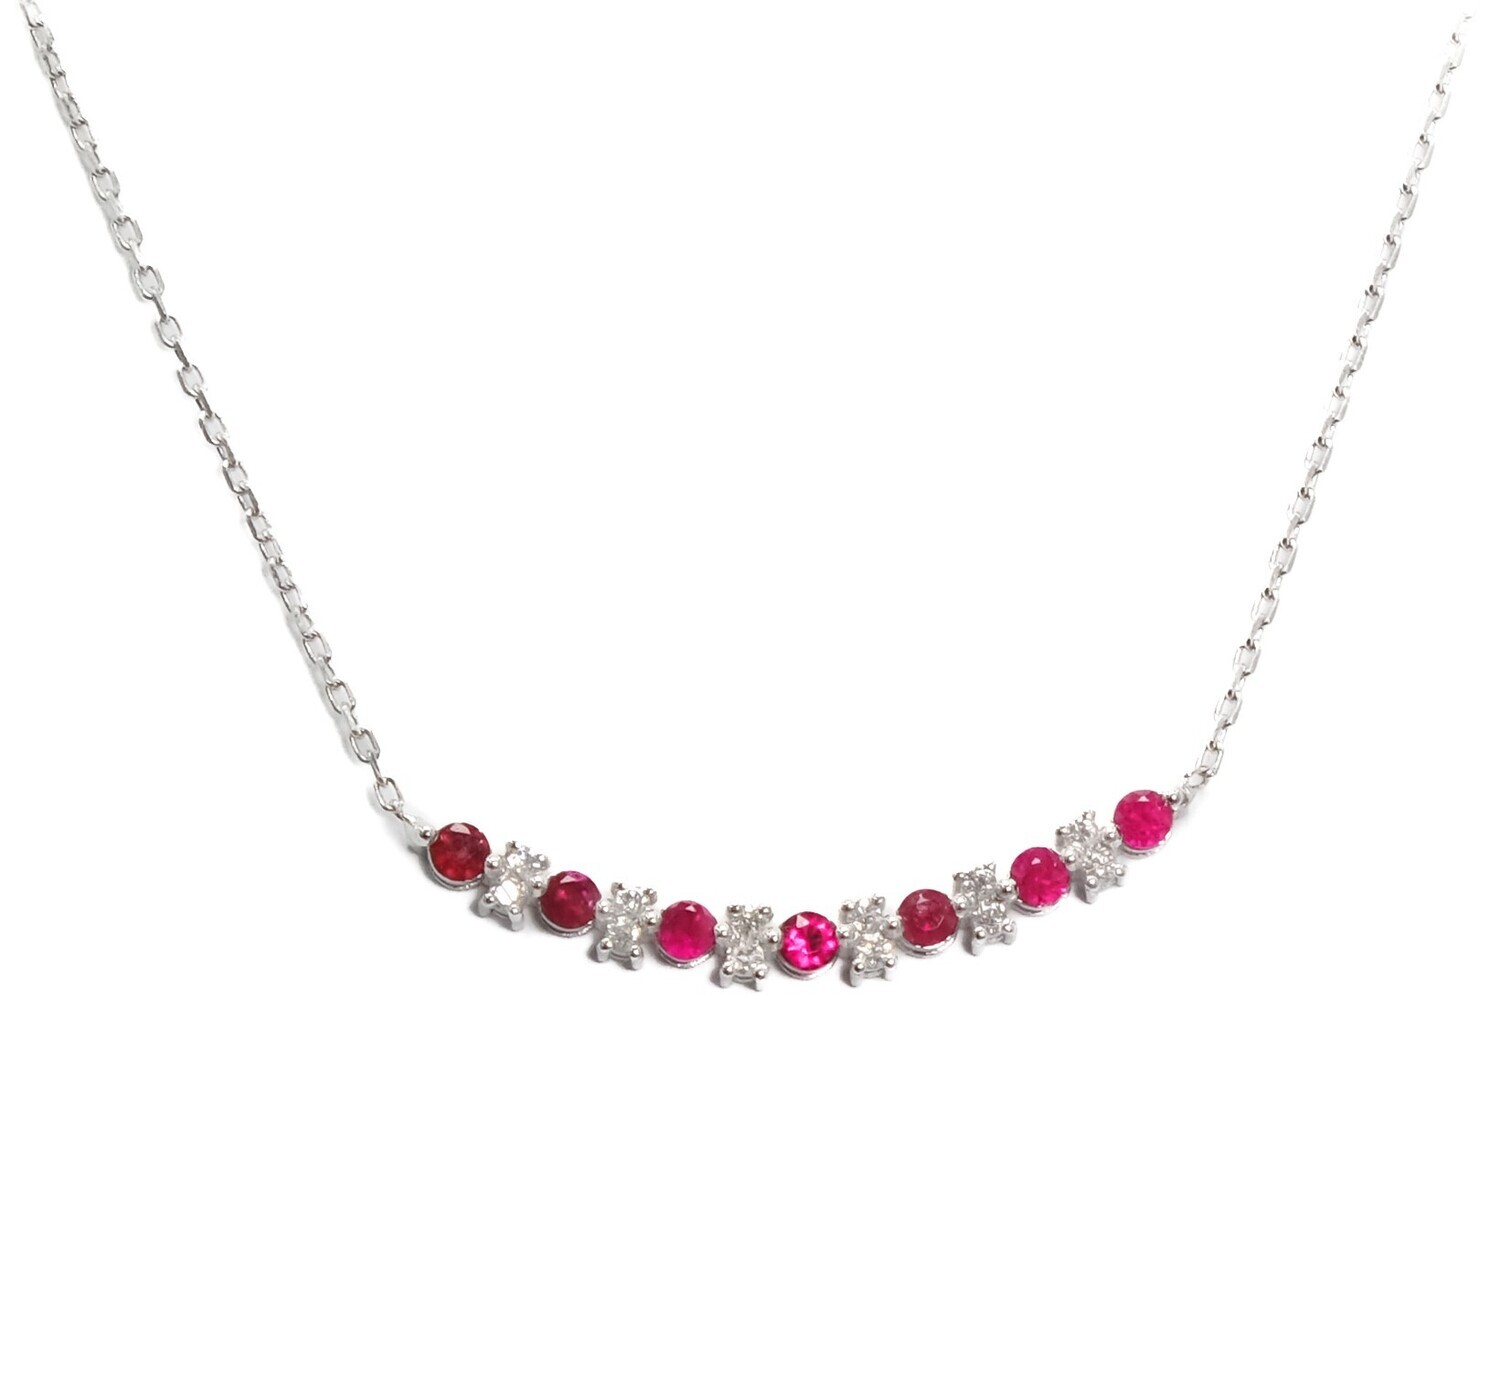 Ruby and Diamonds necklace